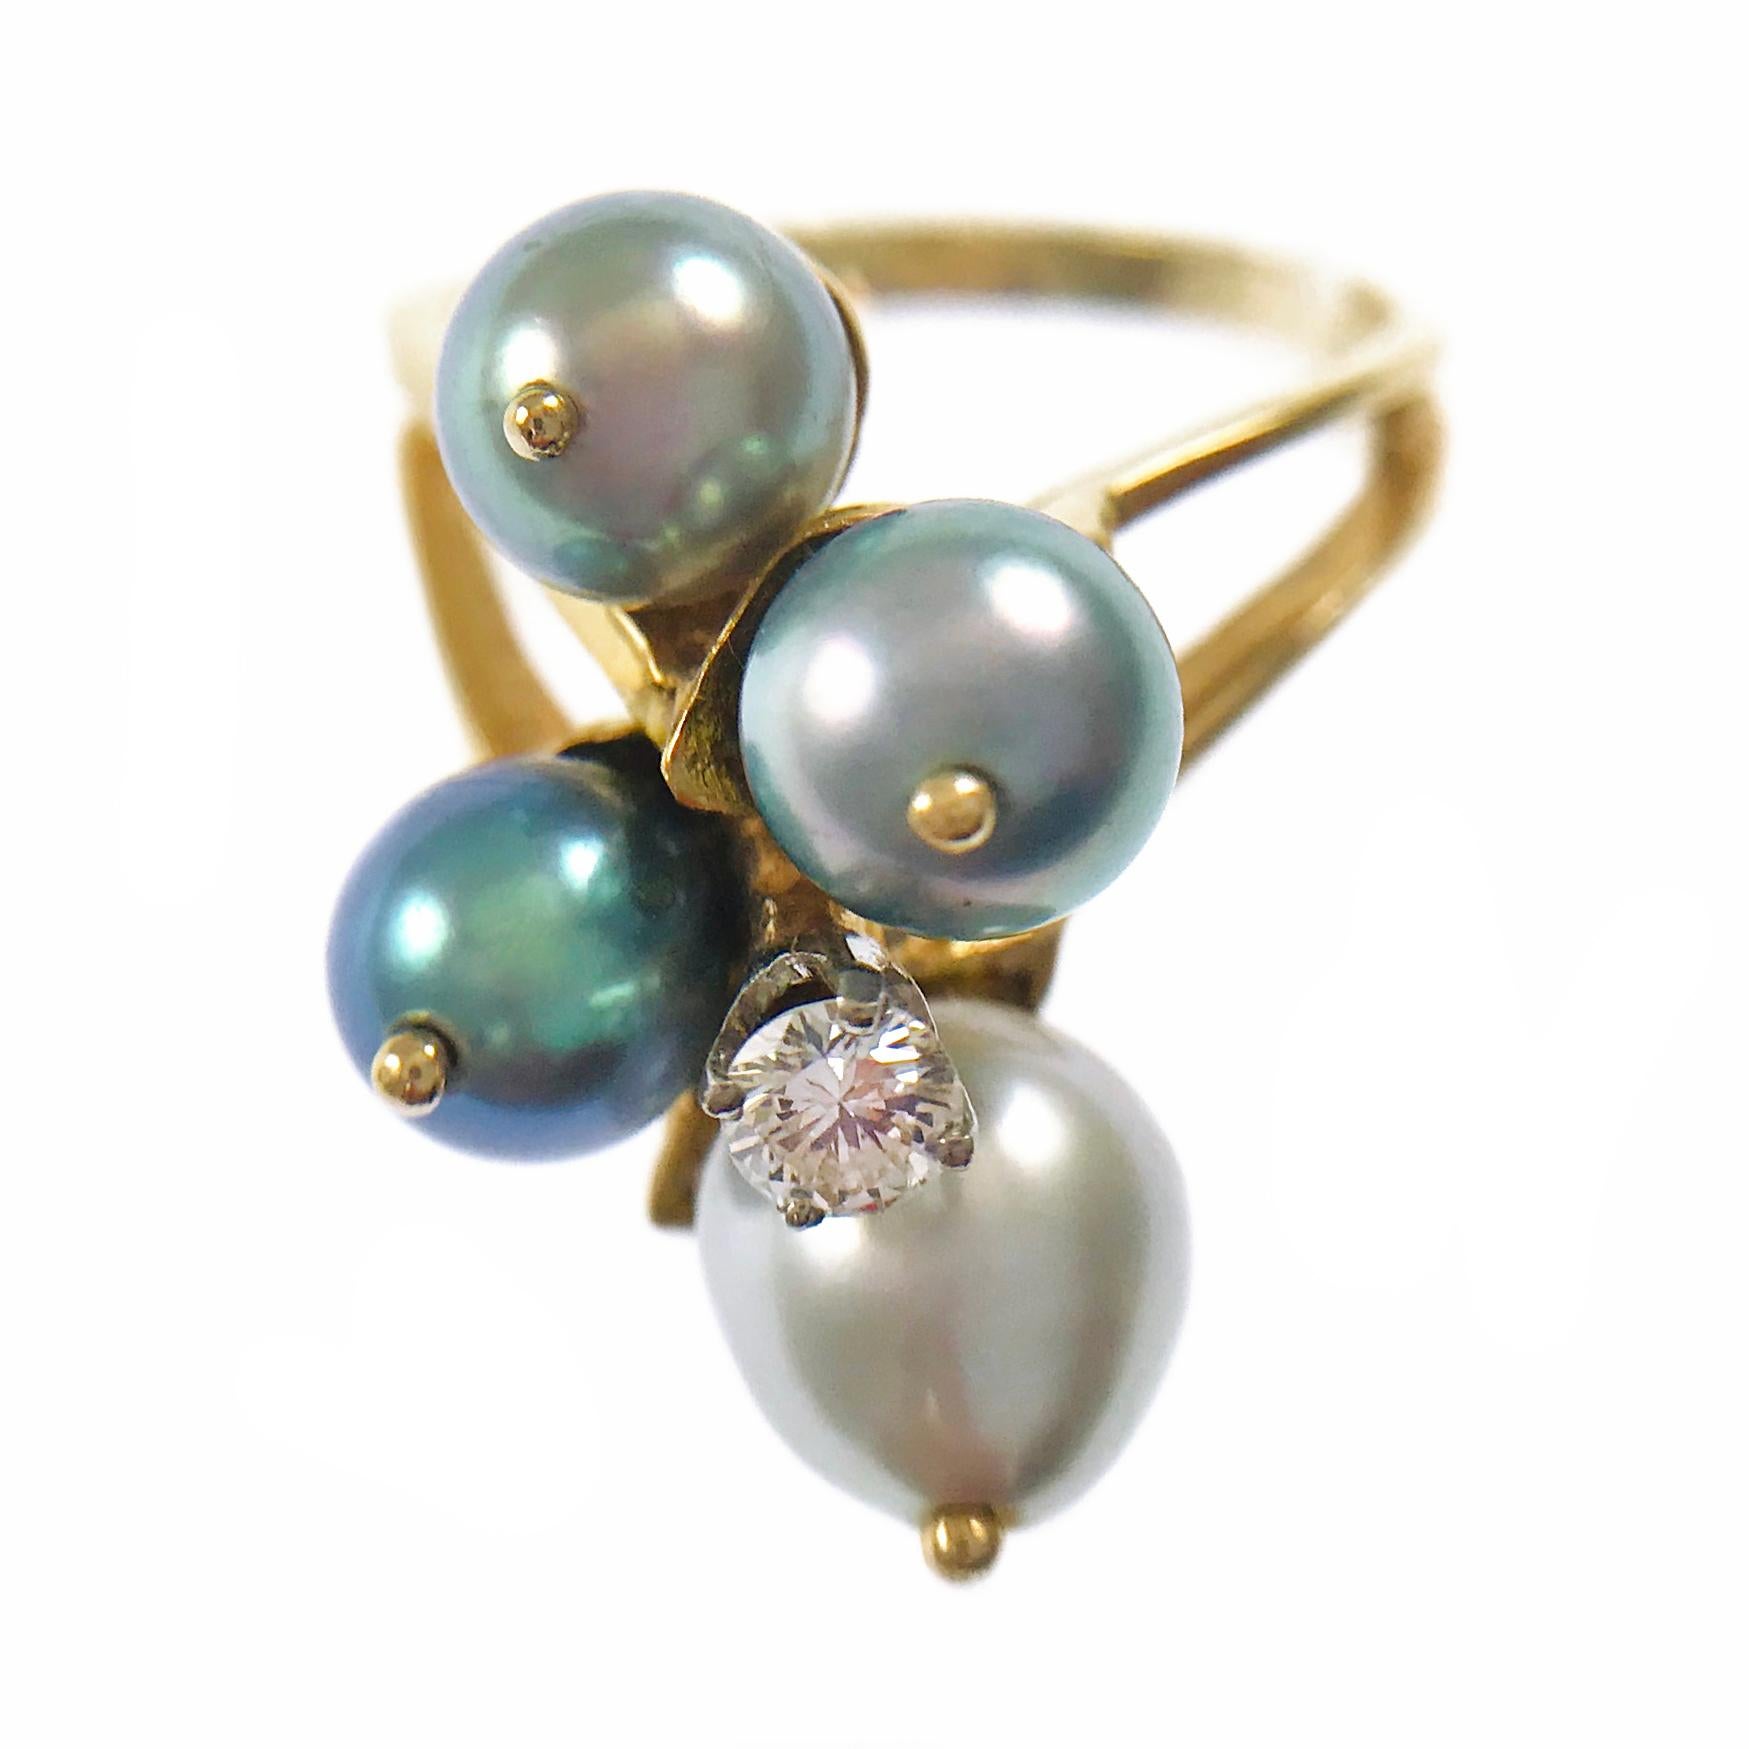 14 Karat Blue-Gray Cultured Pearl Diamond Ring. This split band ring features four blue-gray pearls and a single, four-prong-set diamond. The pearls range in size from 6.2mm to 7.2mm, three are round and one is oval. The pearl hues are a blend of